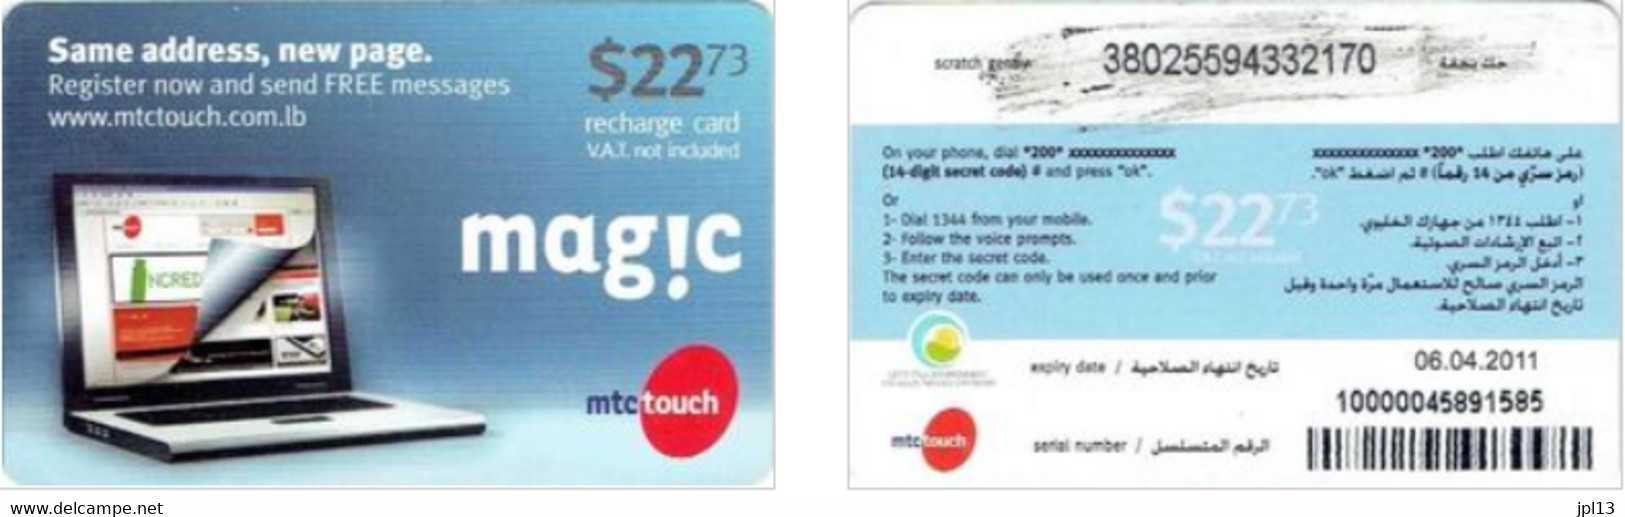 Recharge GSM - Liban - MTC Touch - Magic - Computer $22,73, Exp. 17/03/2011 - Líbano